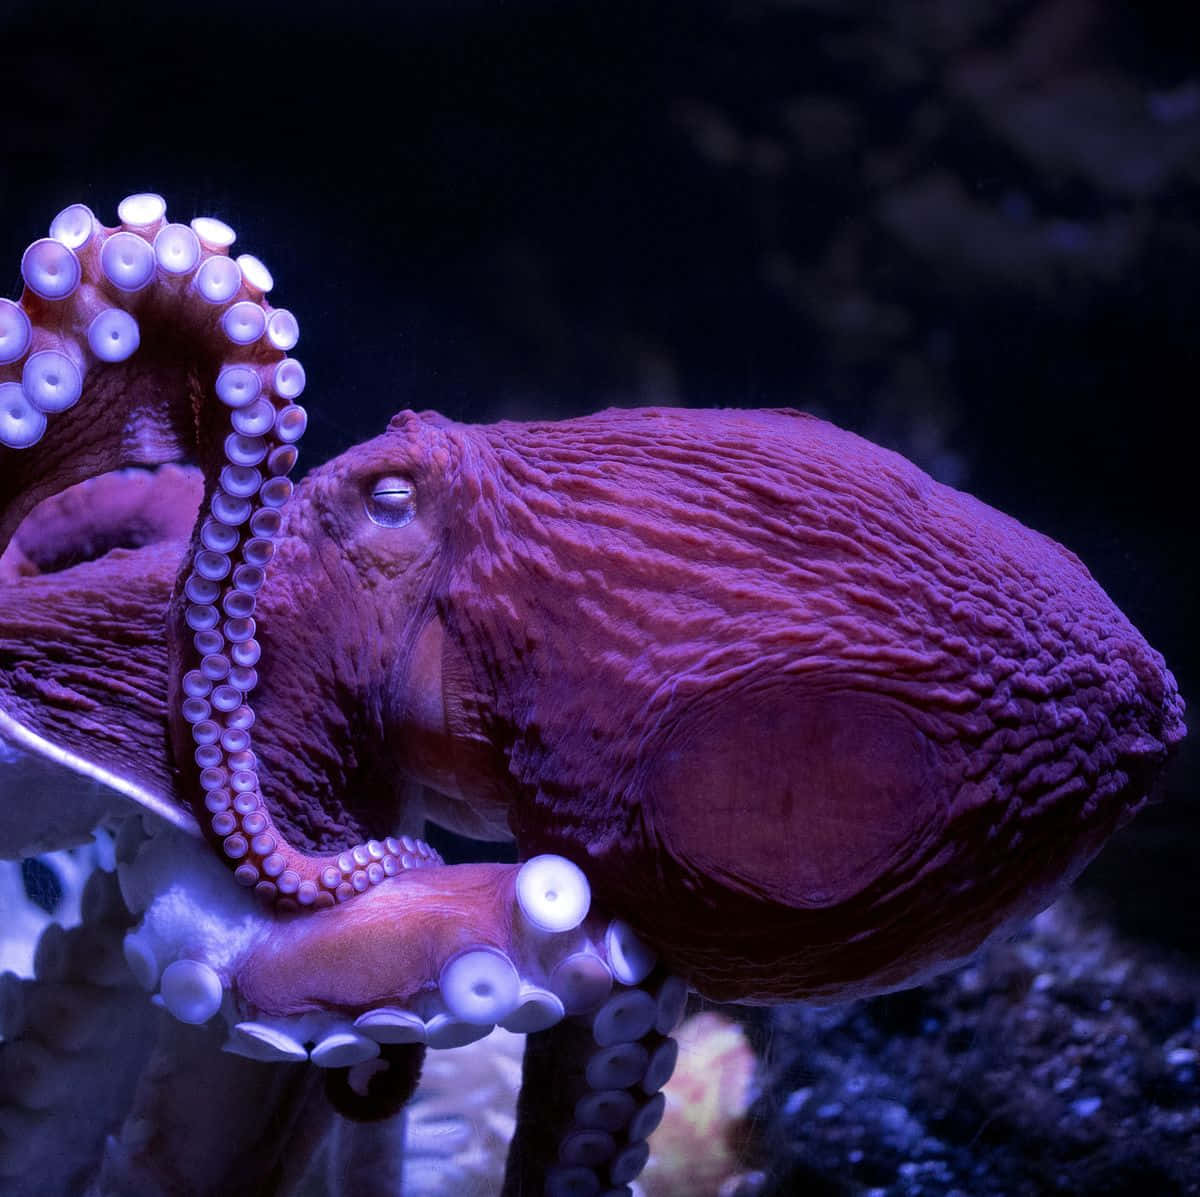 An Octopus's Mysterious Subaquatic Dance